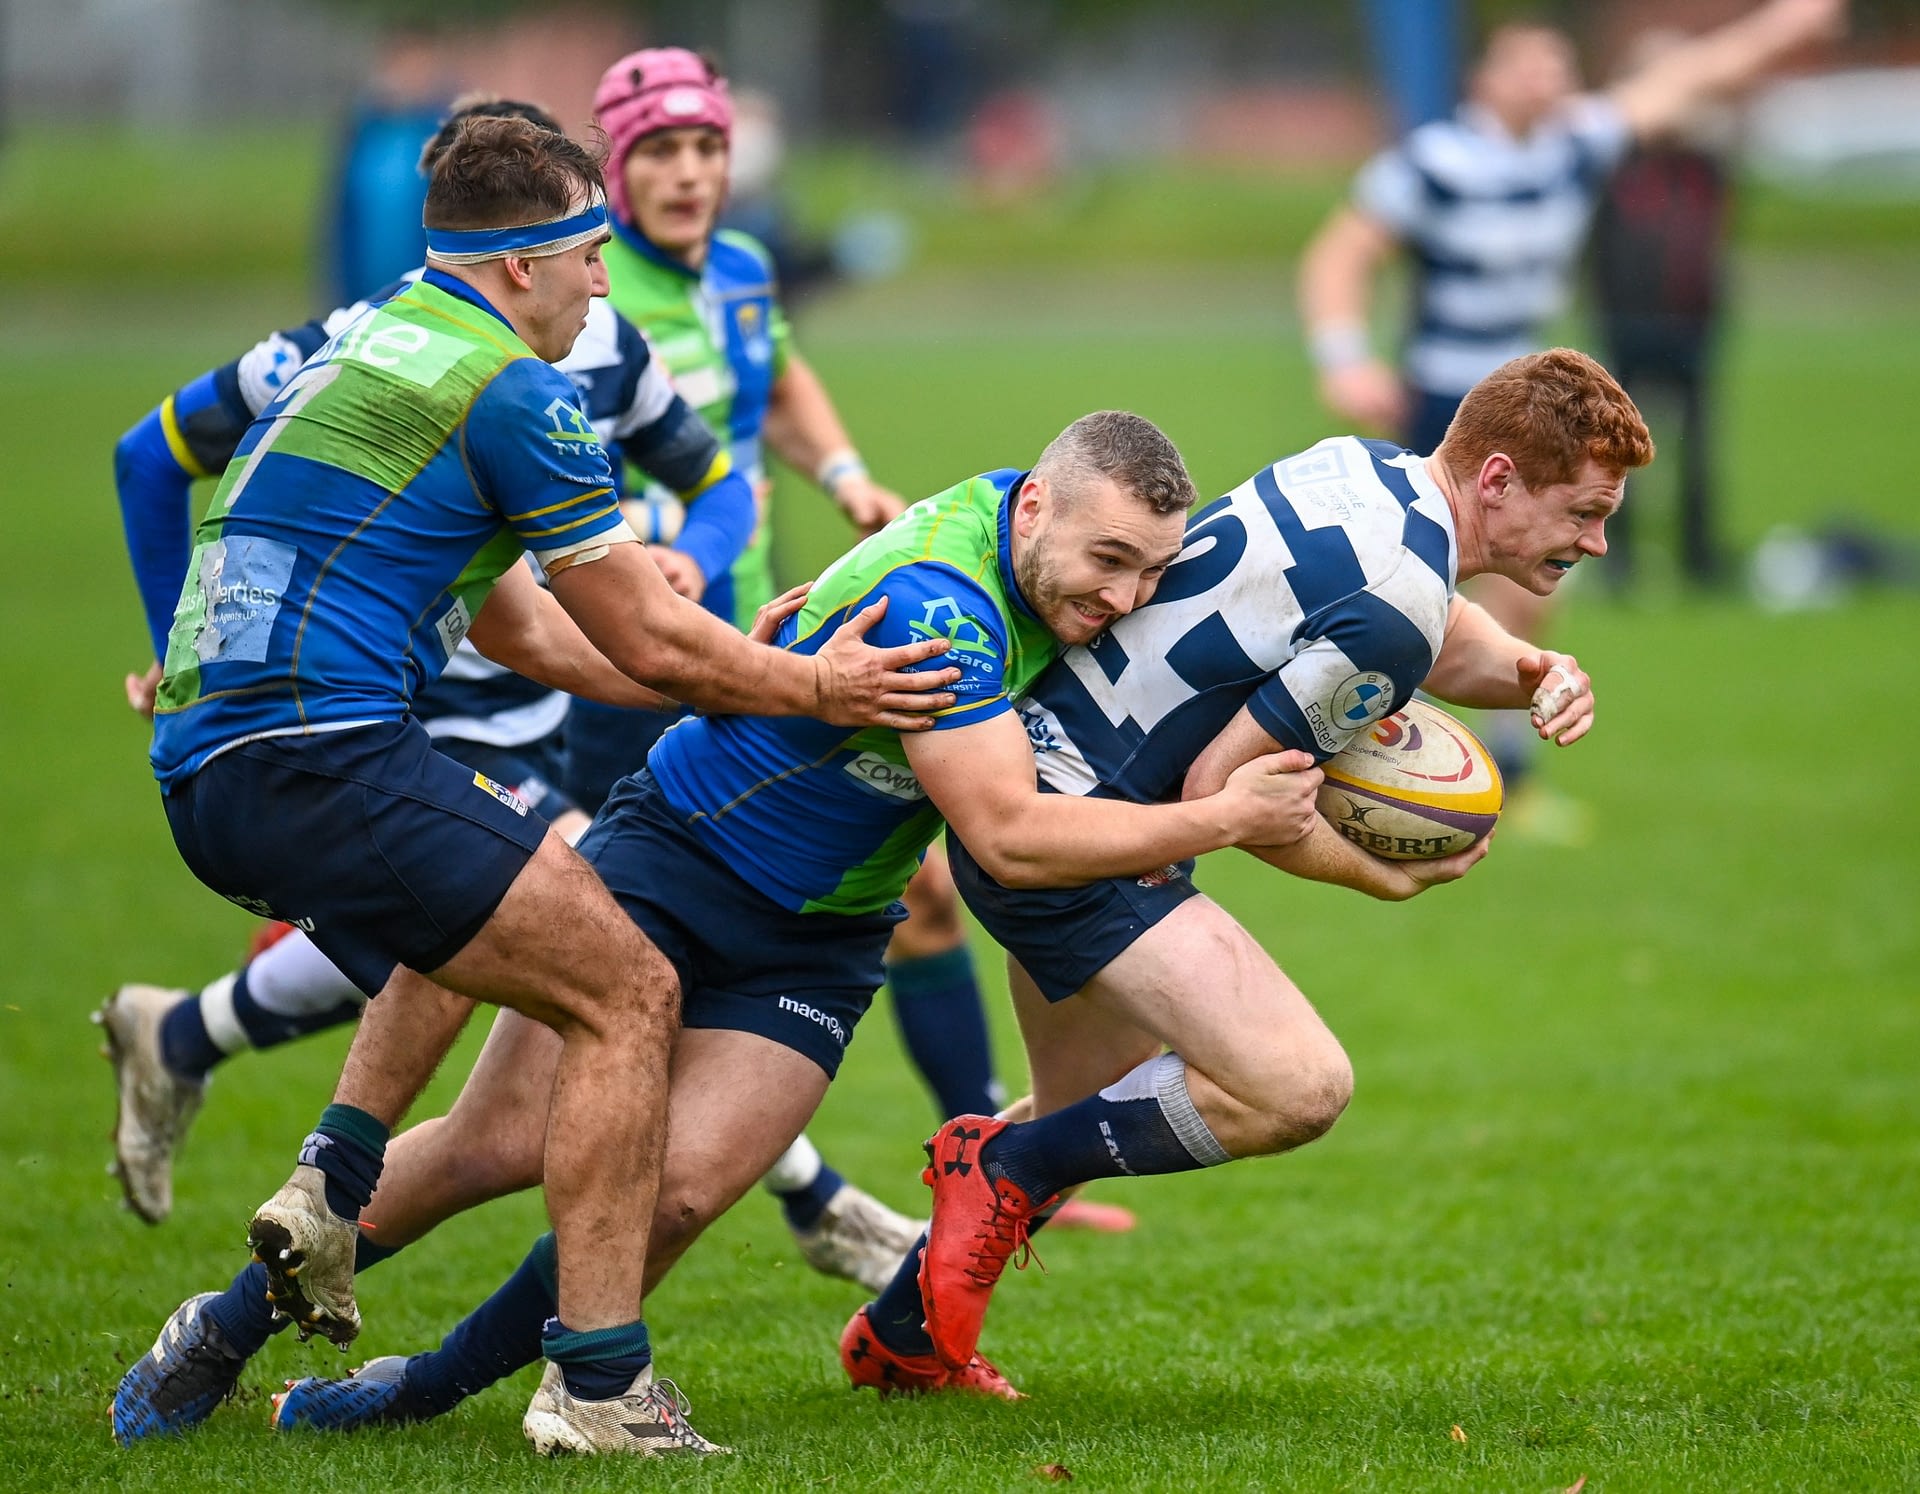 Image taken during the FOSROC Super6 rugby match between Heriot’s Rugby and Boroughmuir Bears at Goldenacre, Edinburgh, Scotland on 16 October 2021.